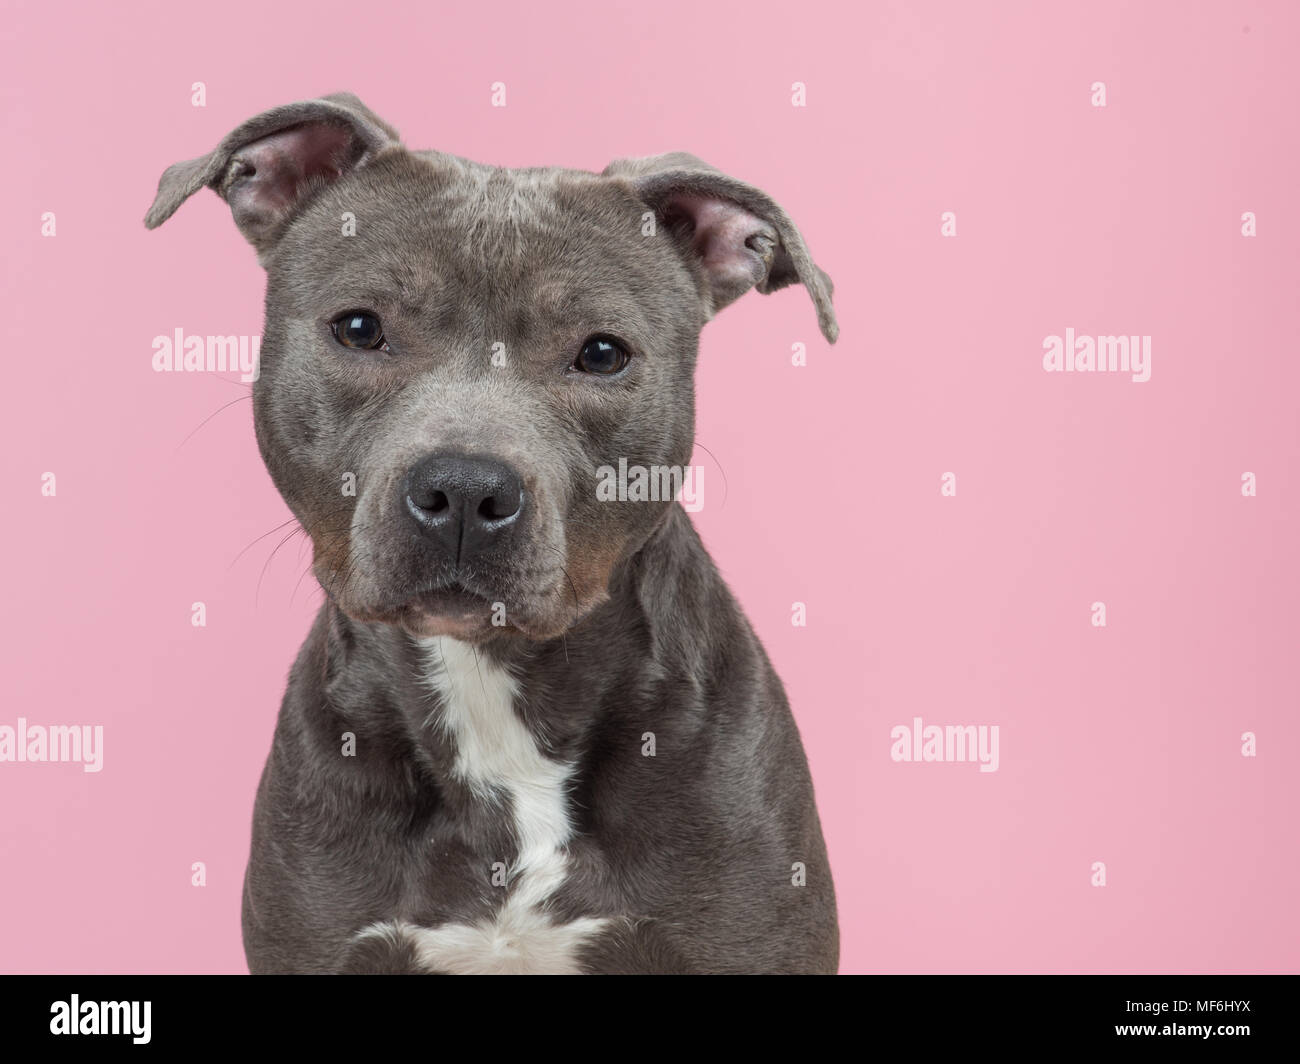 Portrait of a cute gray pitbull terrier dog looking at camera on a pink background Stock Photo